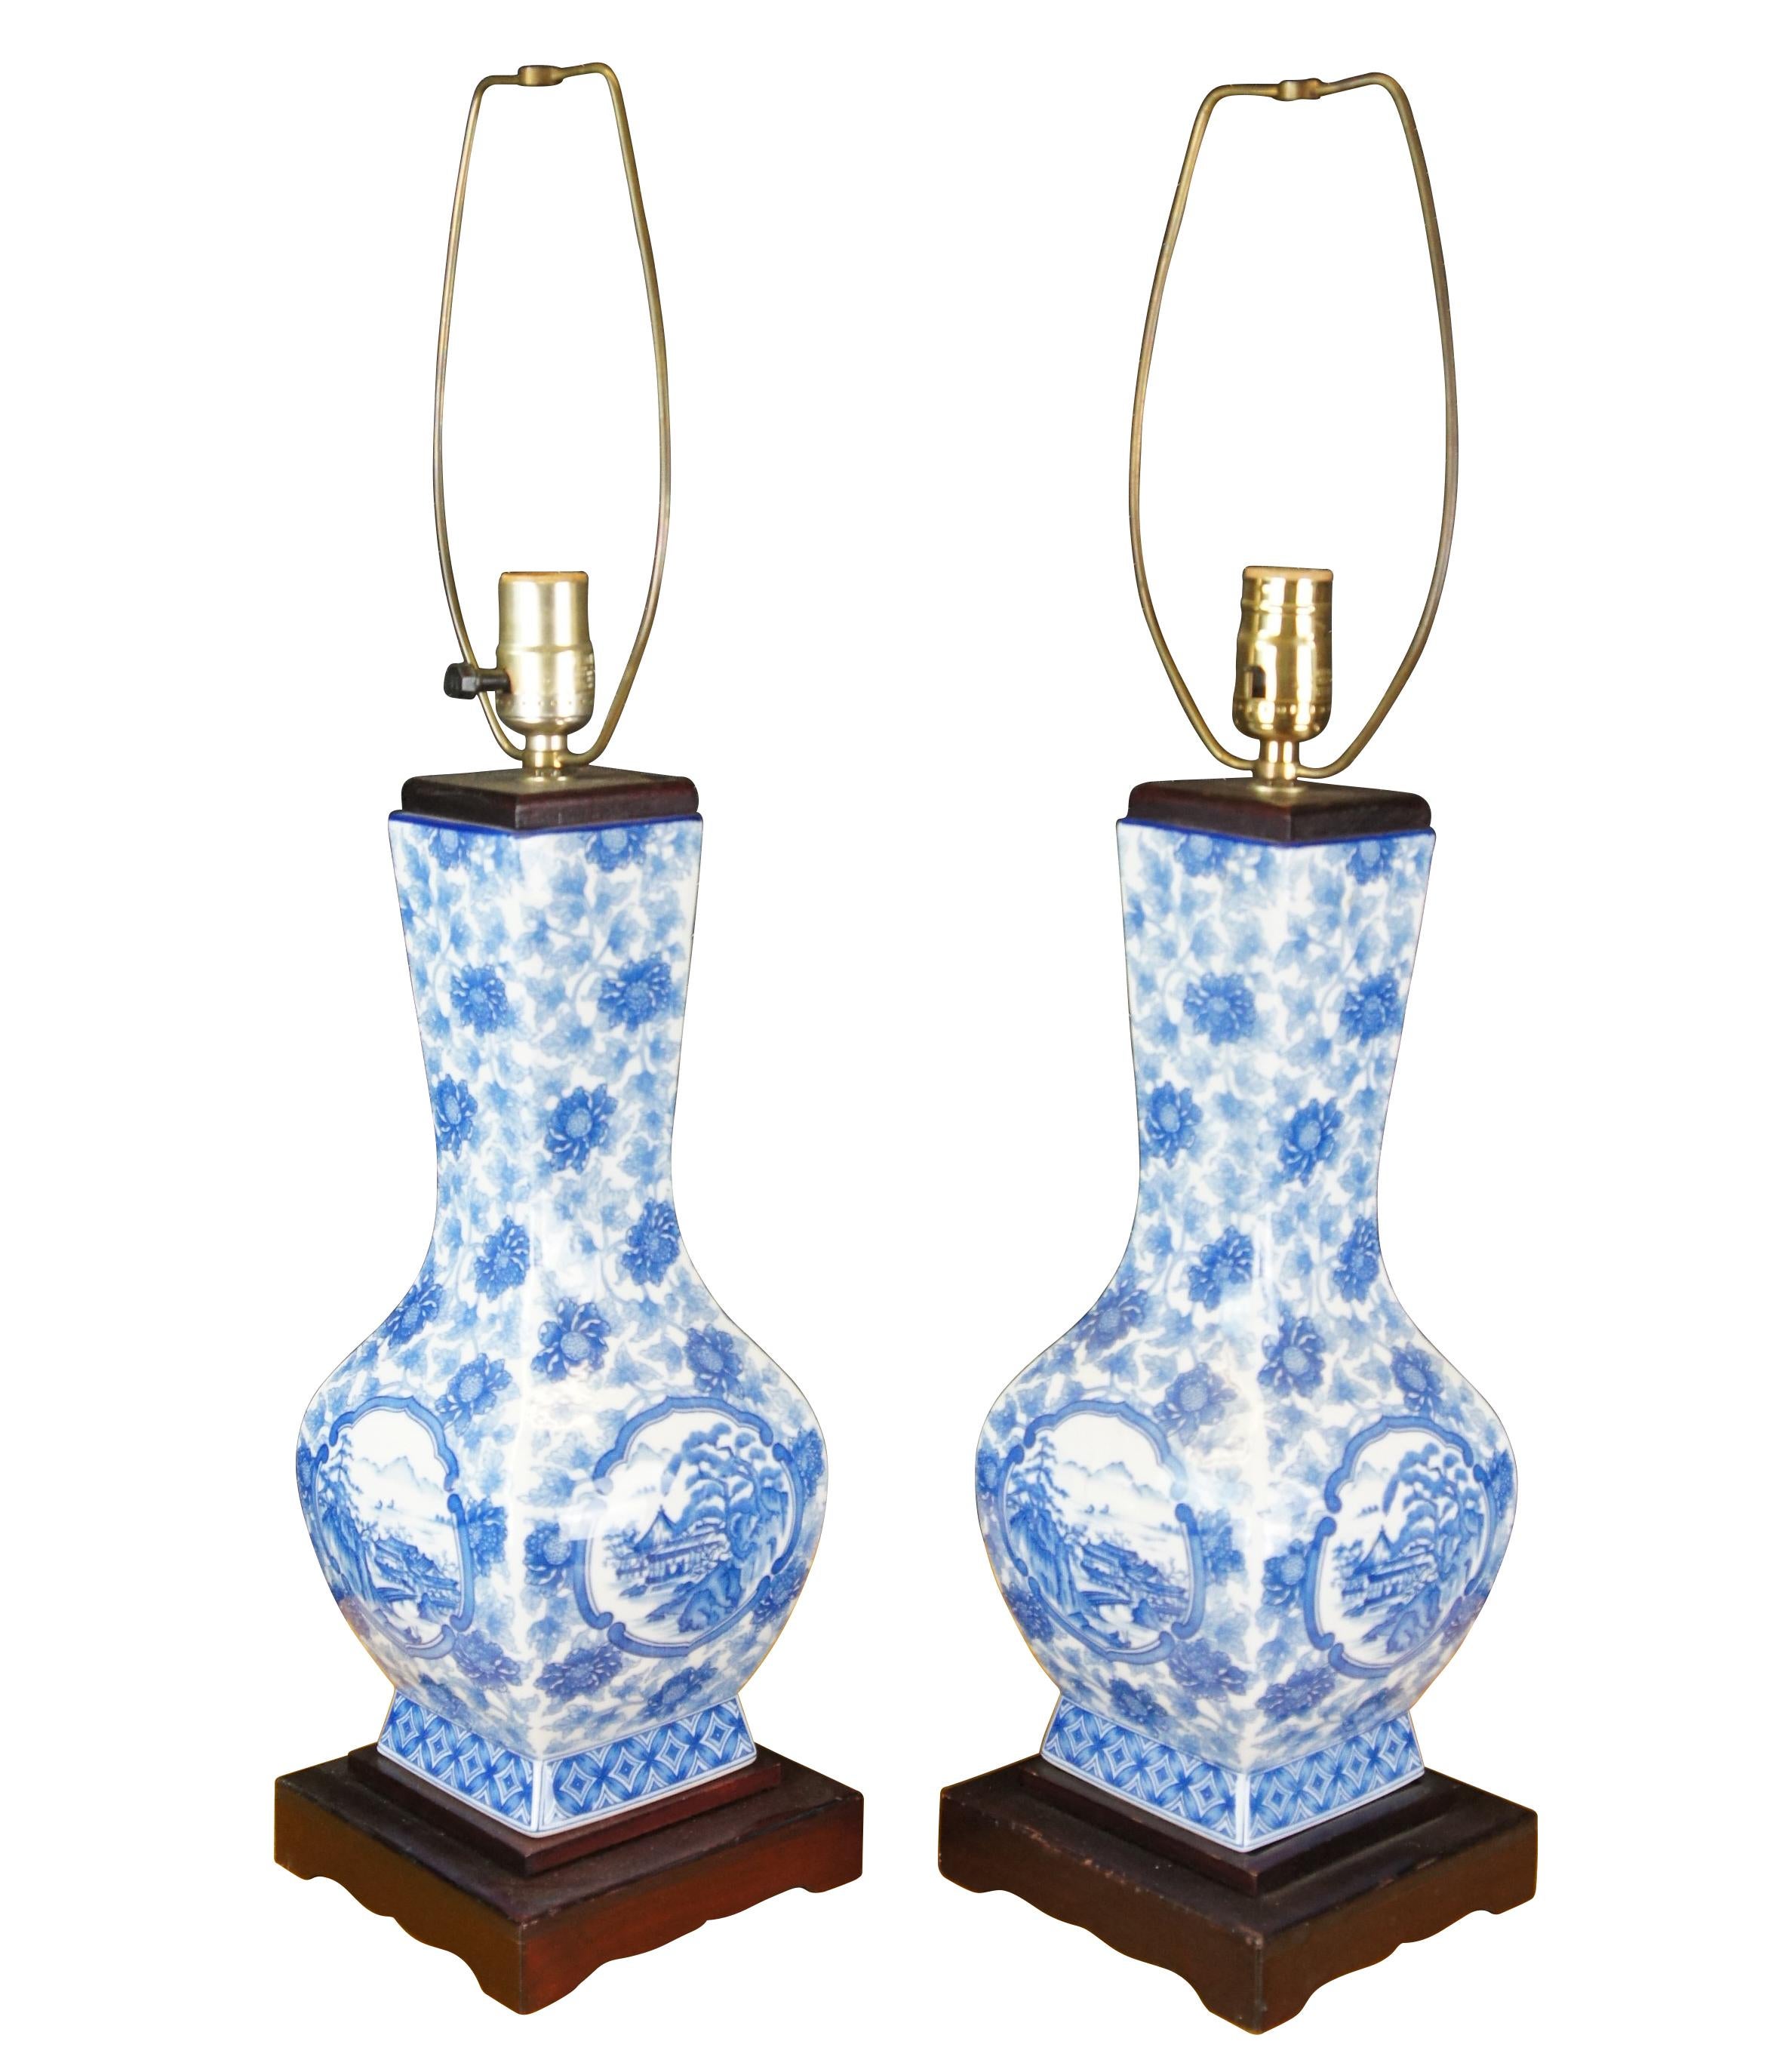 An elegant pair of Chinese table lamps in the form of a vase or urn. The blue and white porcelain vases features a field of Chrysanthemums with a pagoda landscape scene. Each lamp is on a wooden base.